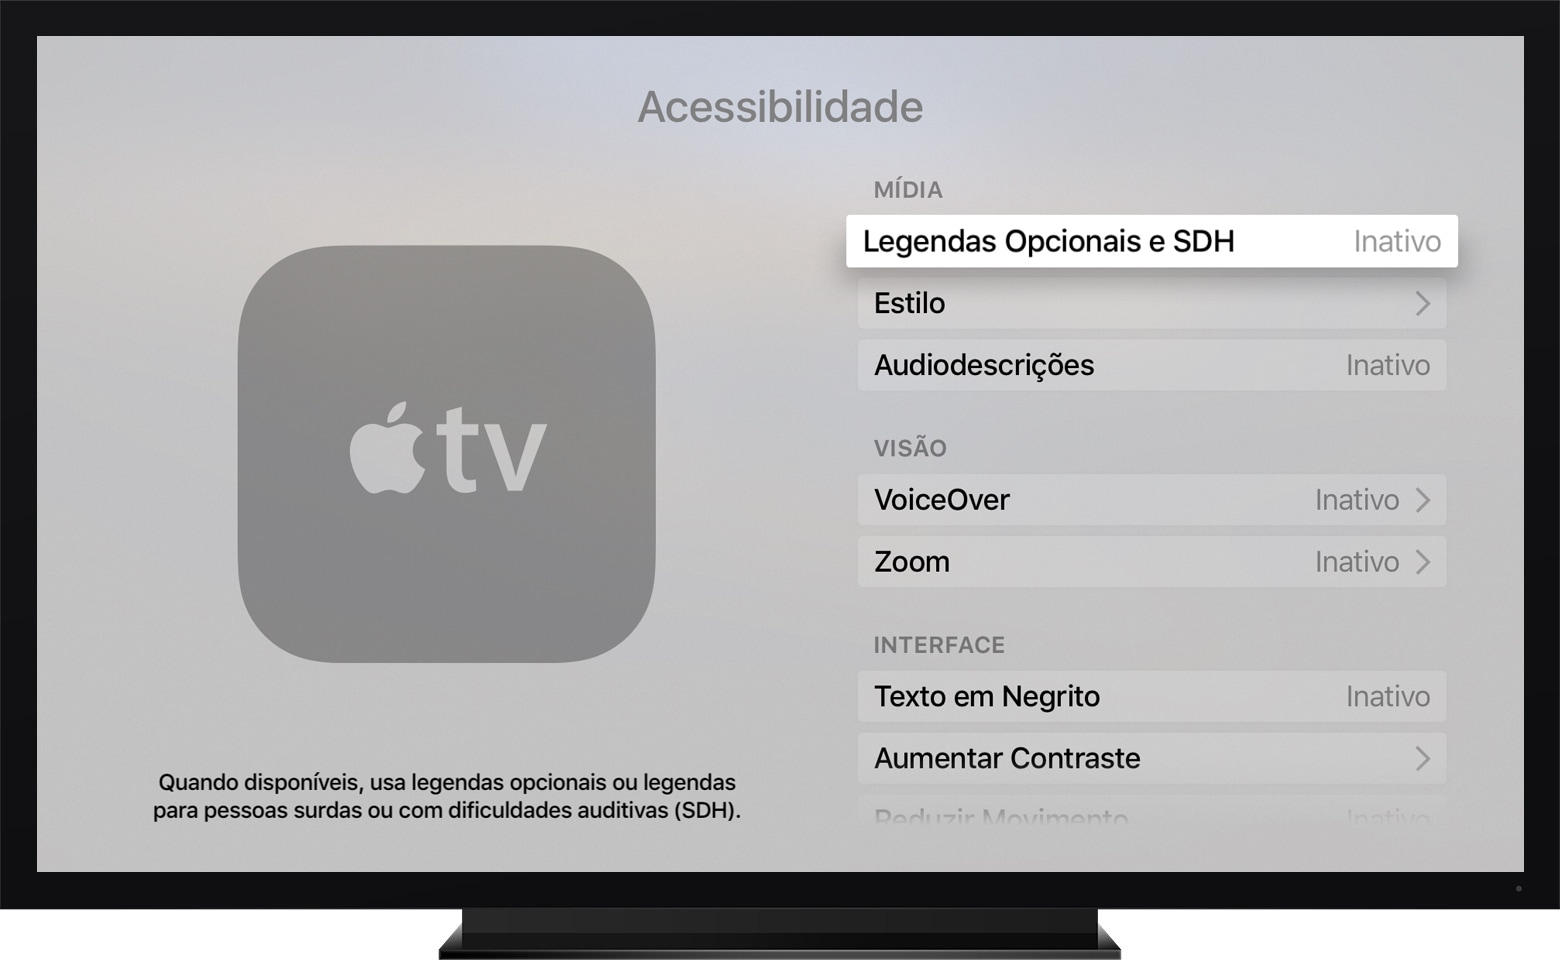 Learn how to enable and customize the appearance of subtitles on your iPhone, iPad, iPod touch, and Apple TV